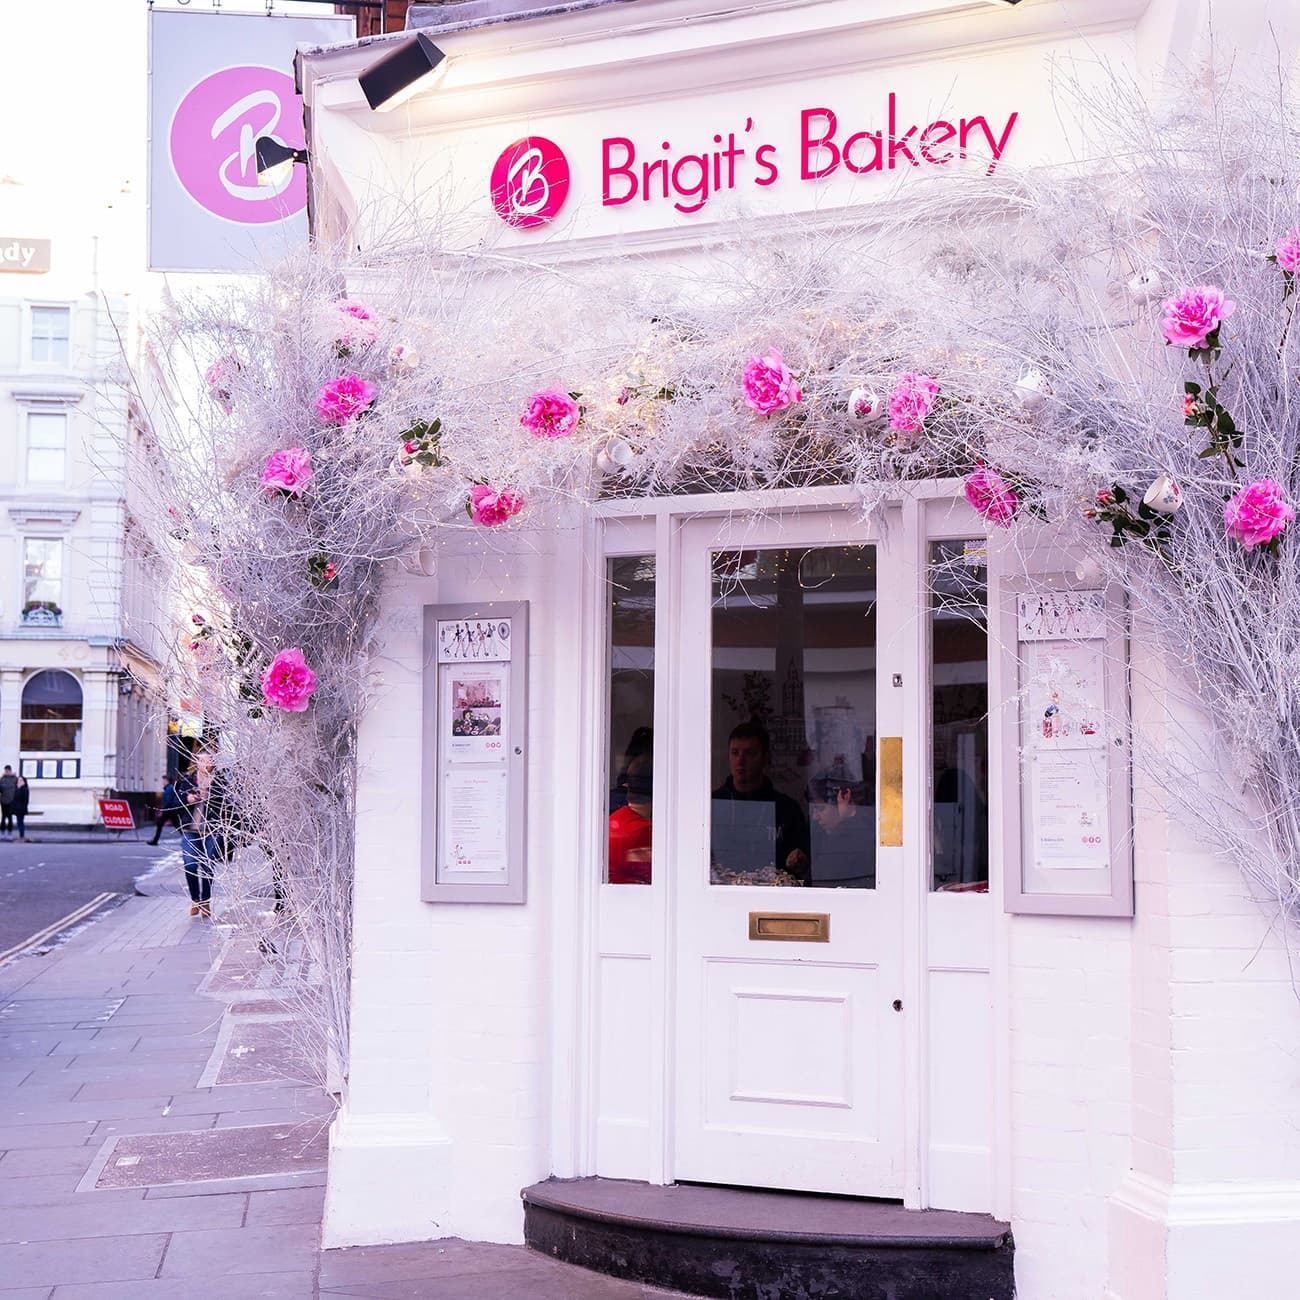 Christmas Lights Afternoon Tea Bus Tour in London: Brigit's Bakery Covent Garden